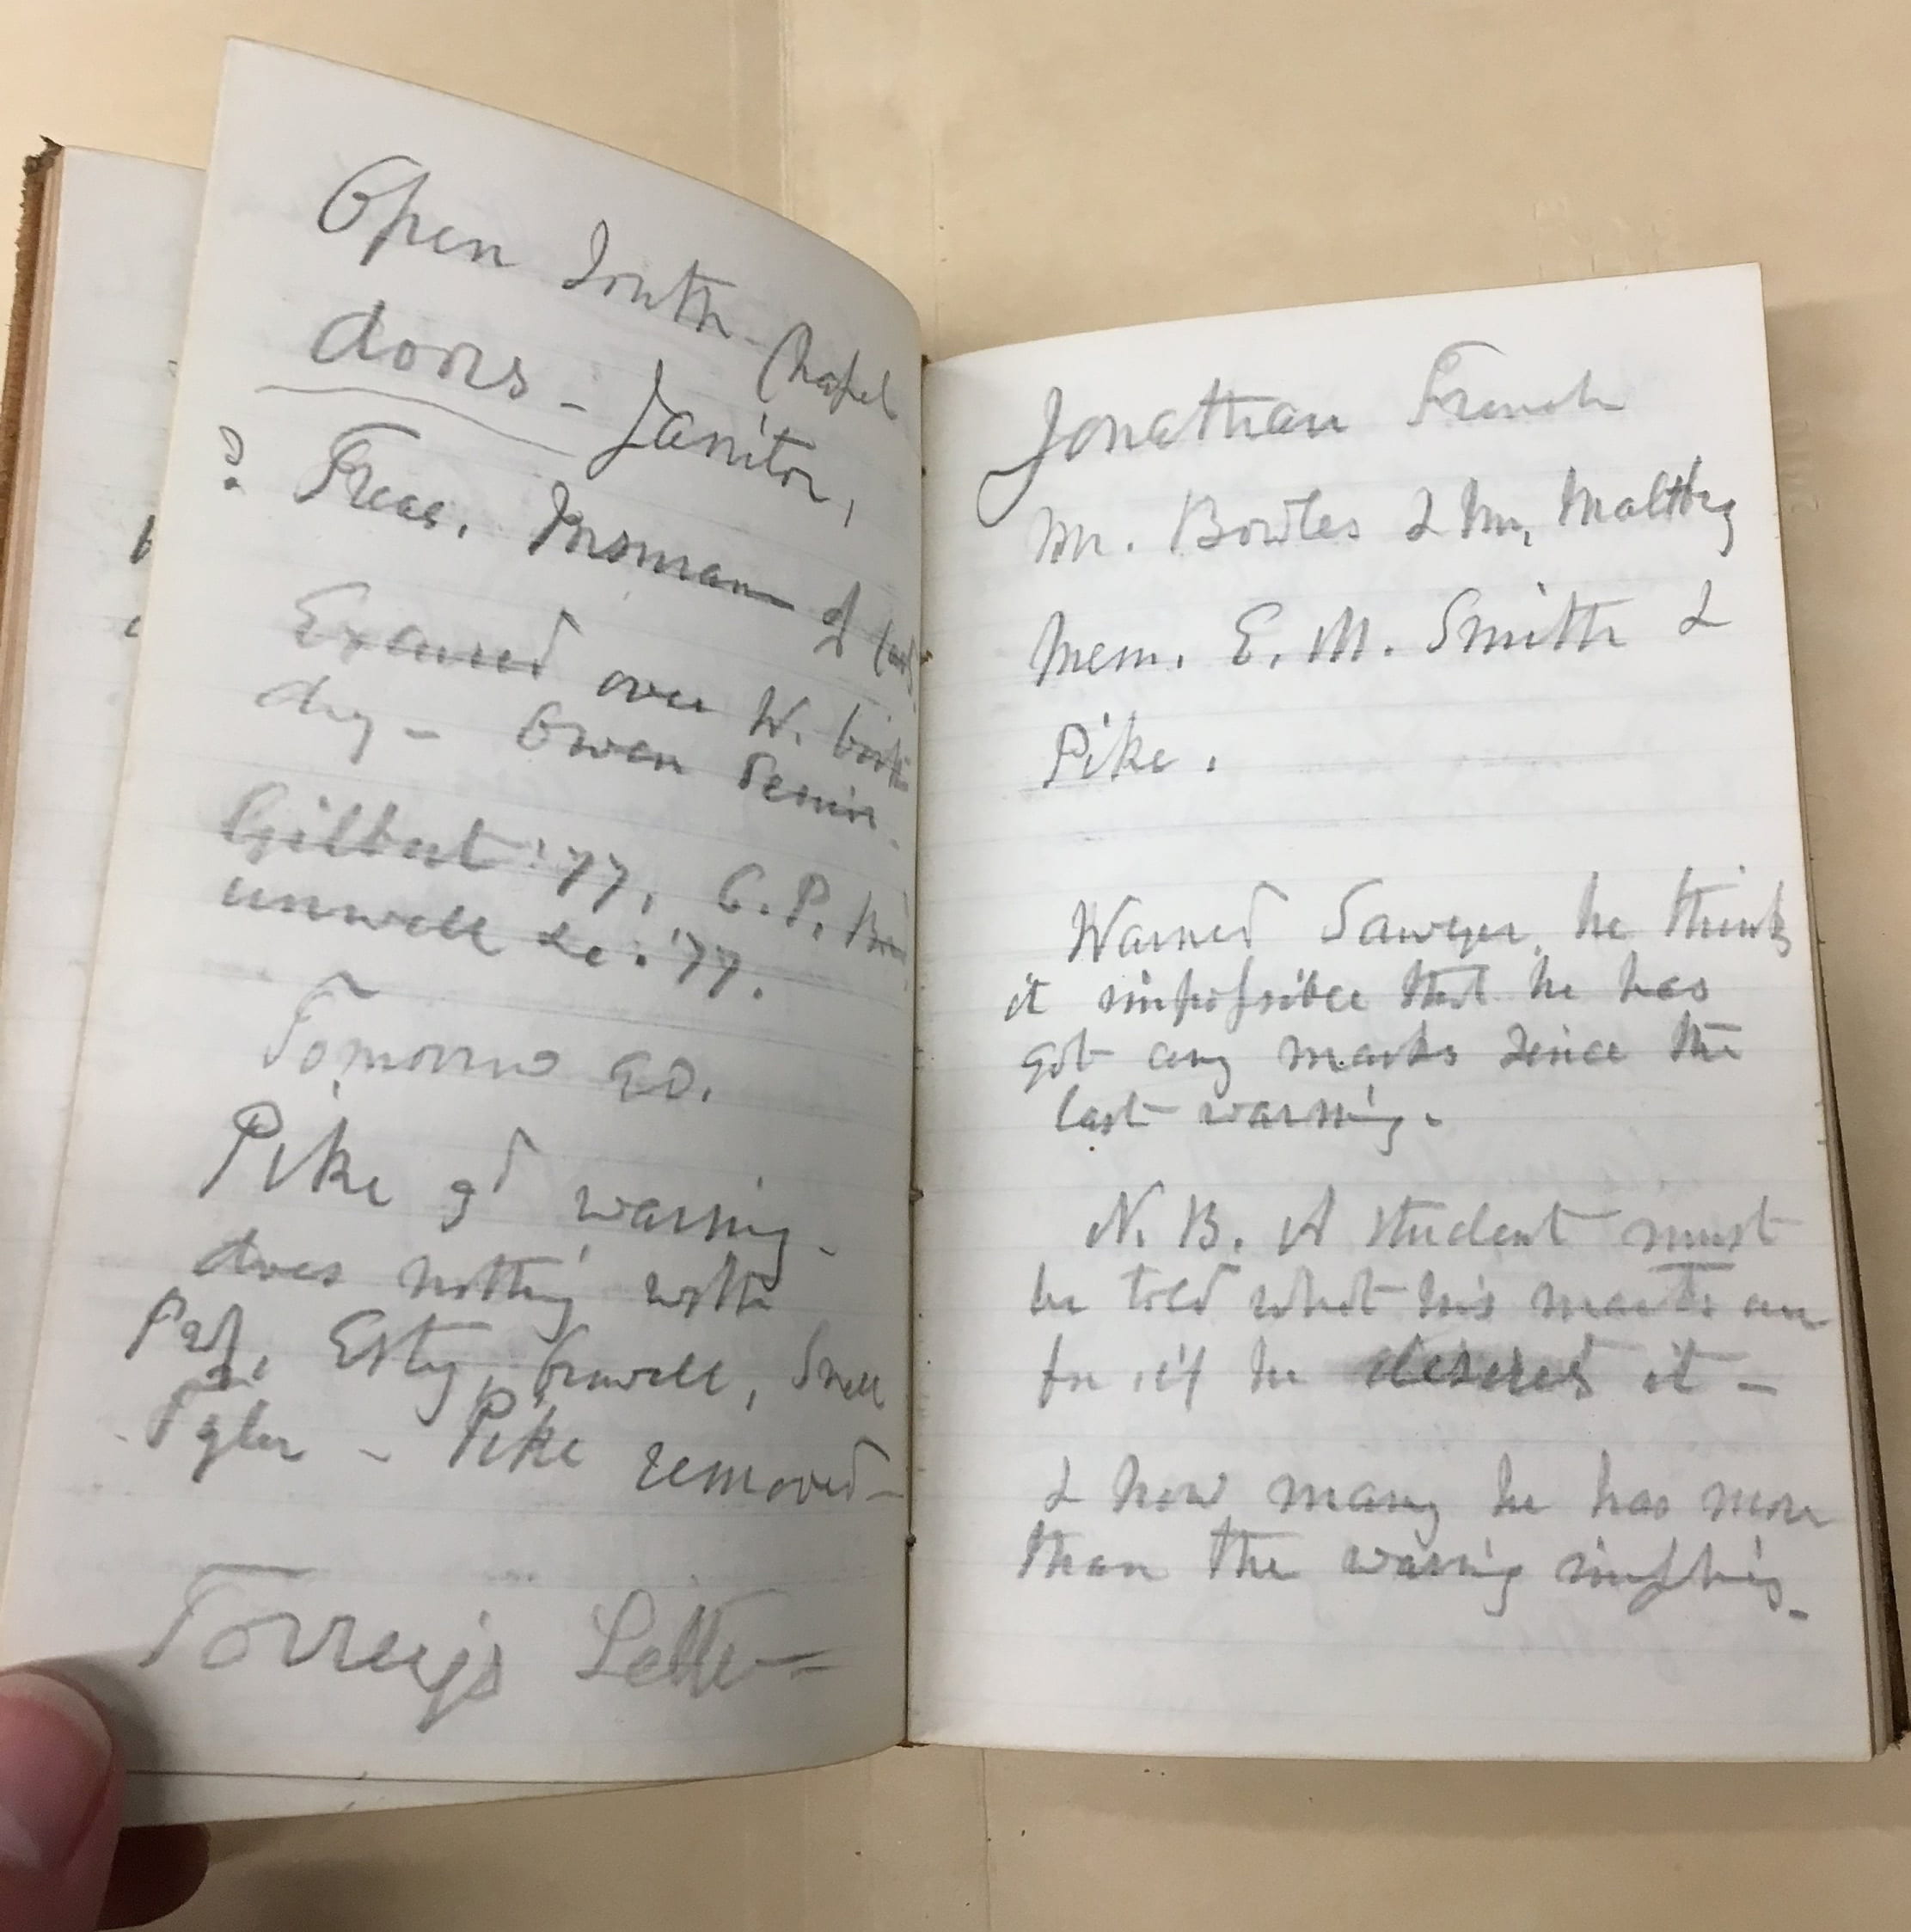 William Stearns faculty meeting notes, 1872